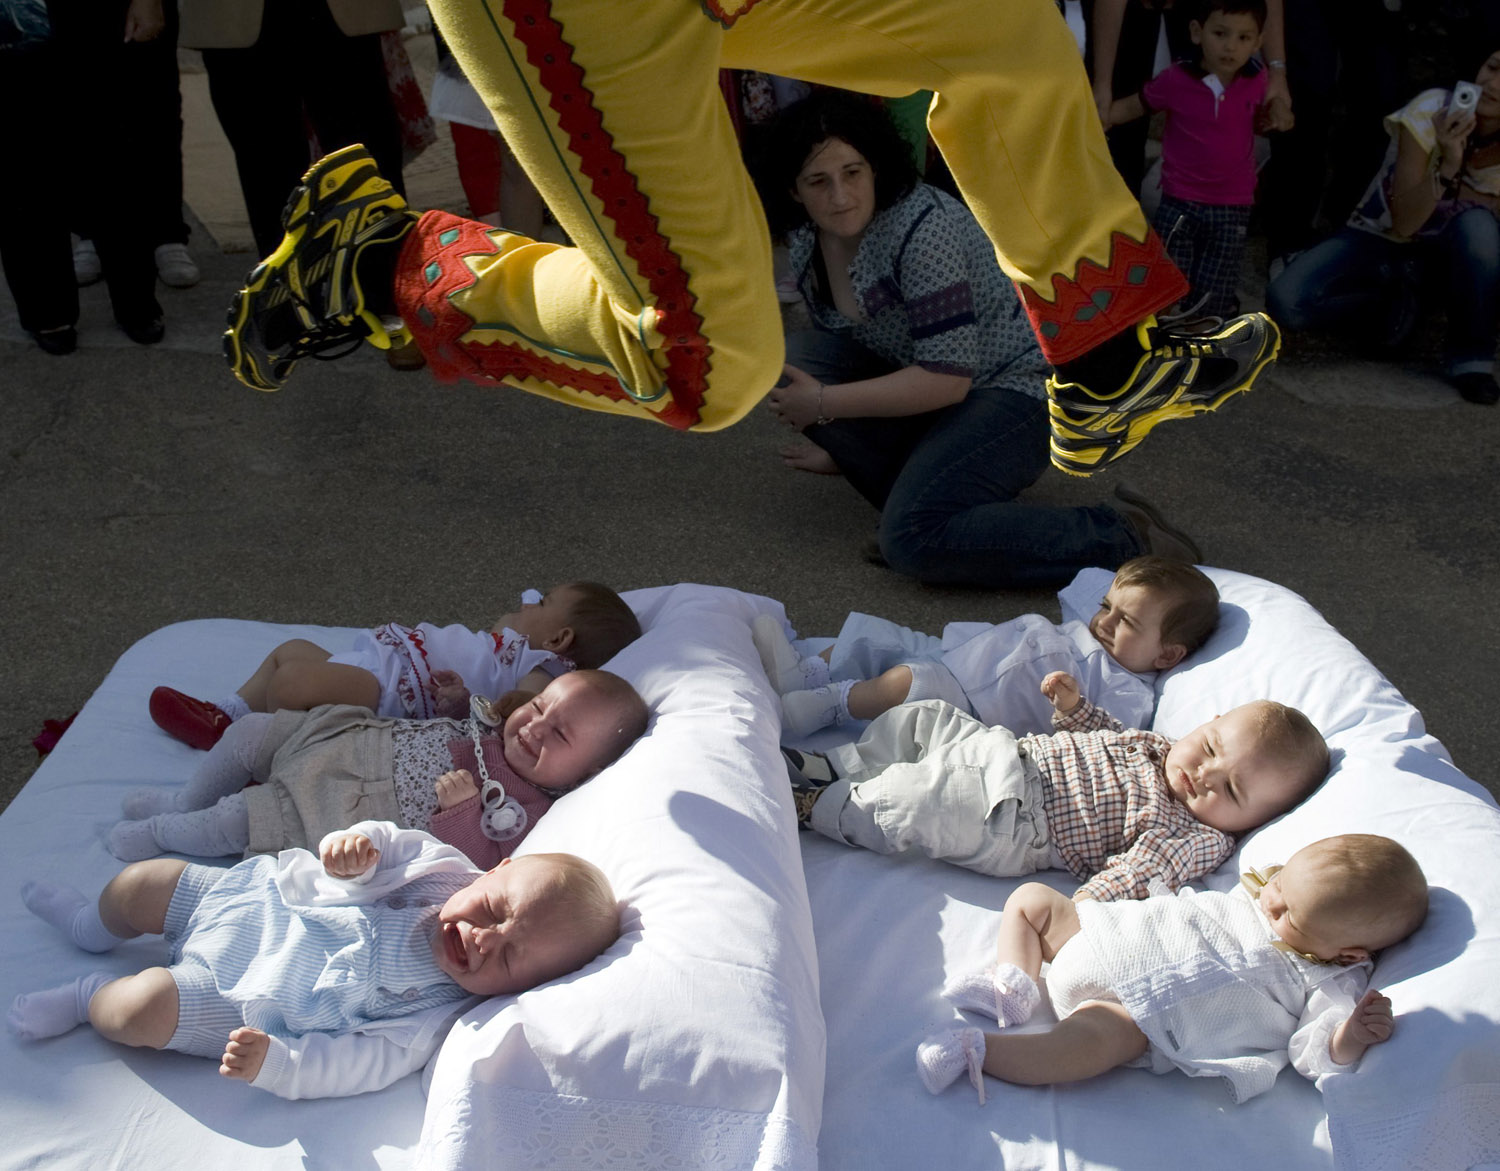 Man dressed in a red and yellow costume representing the devil, known as El Colacho, jumps over babies placed on a mattress during traditional Corpus Christi celebrations in Castrillo de Murcia, near Burgos, northern Spain